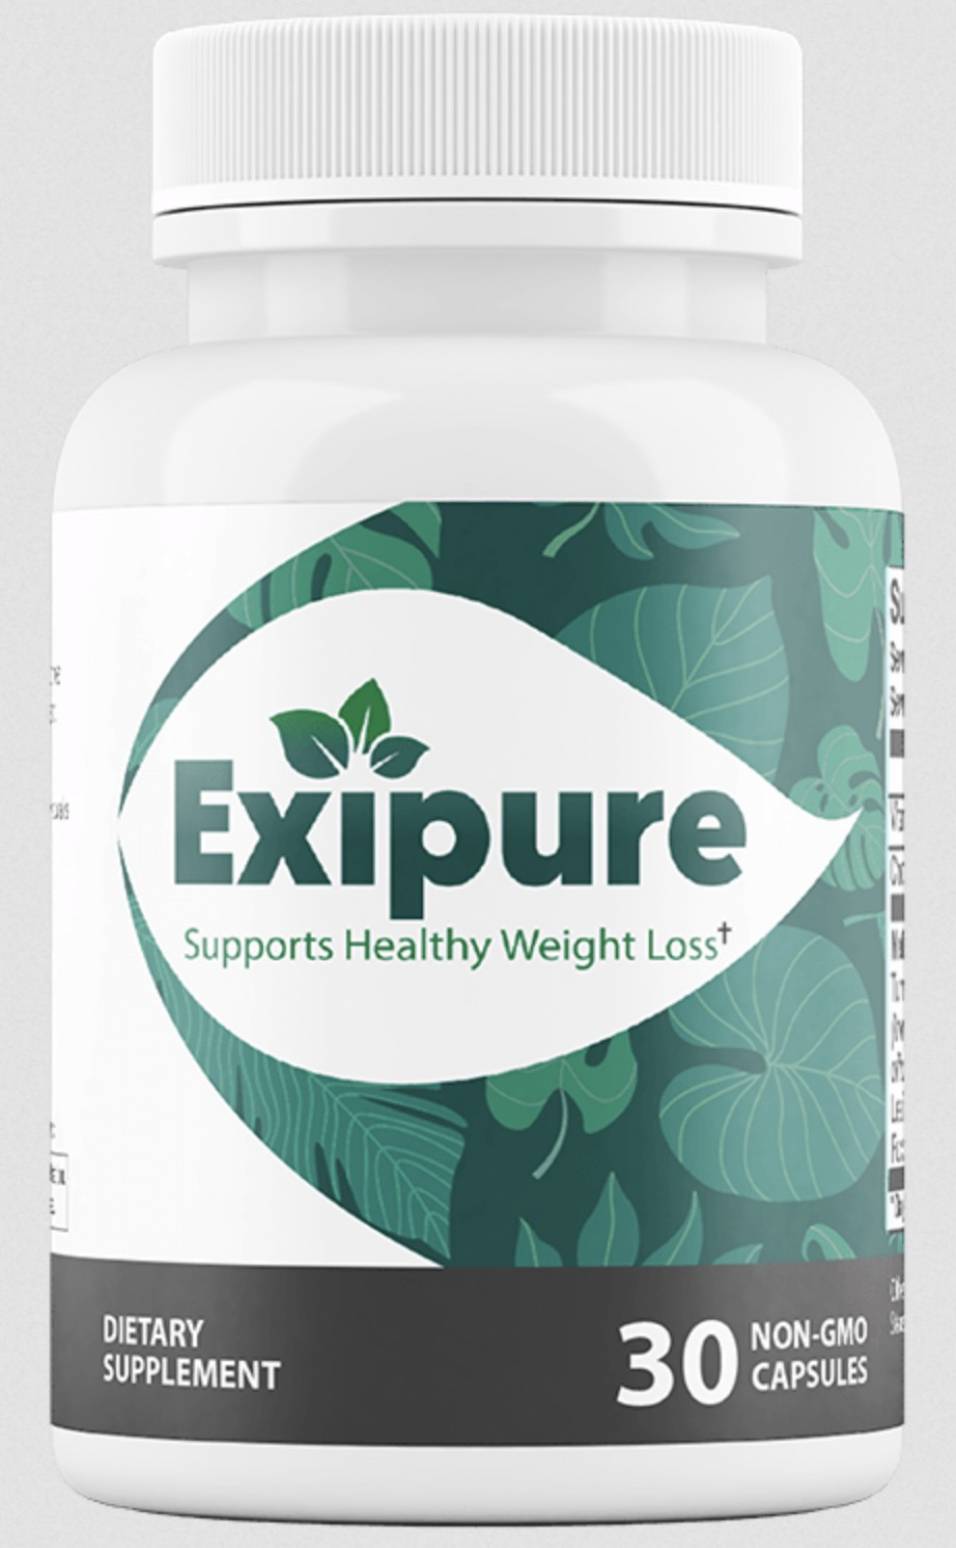 Does Exipure Give You Diarrhea